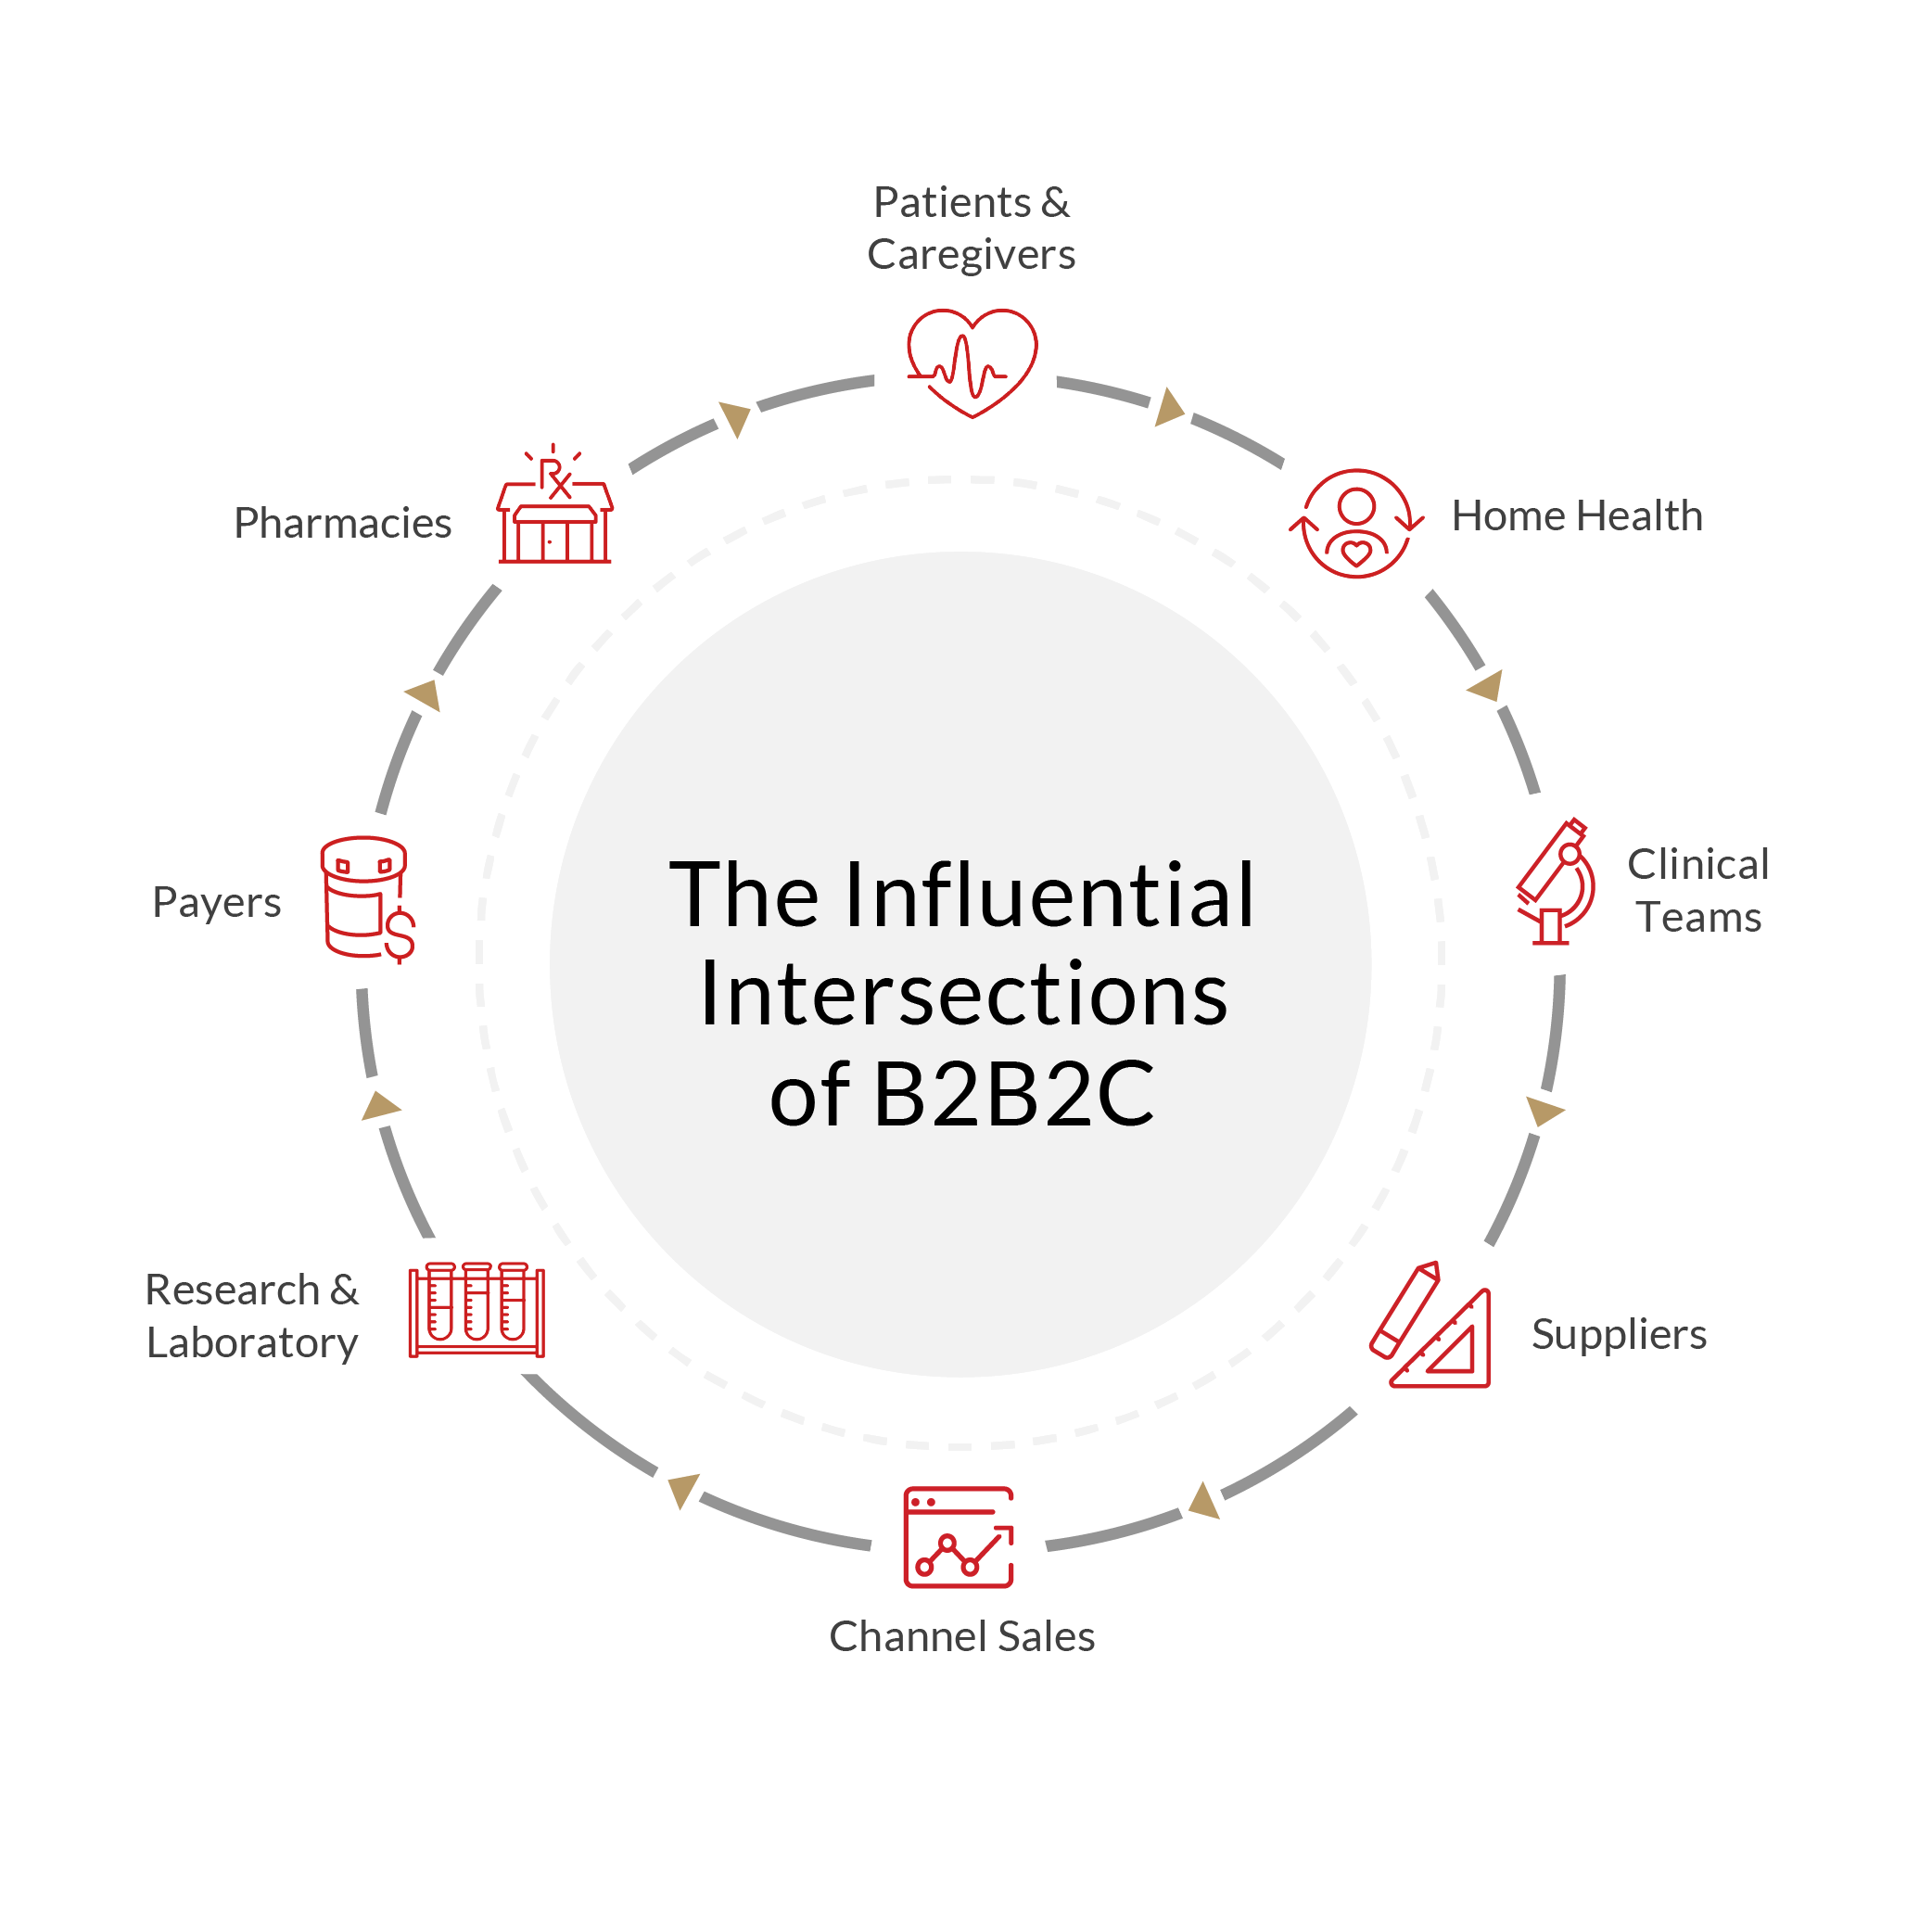 The Influential Intersections of B2B2C